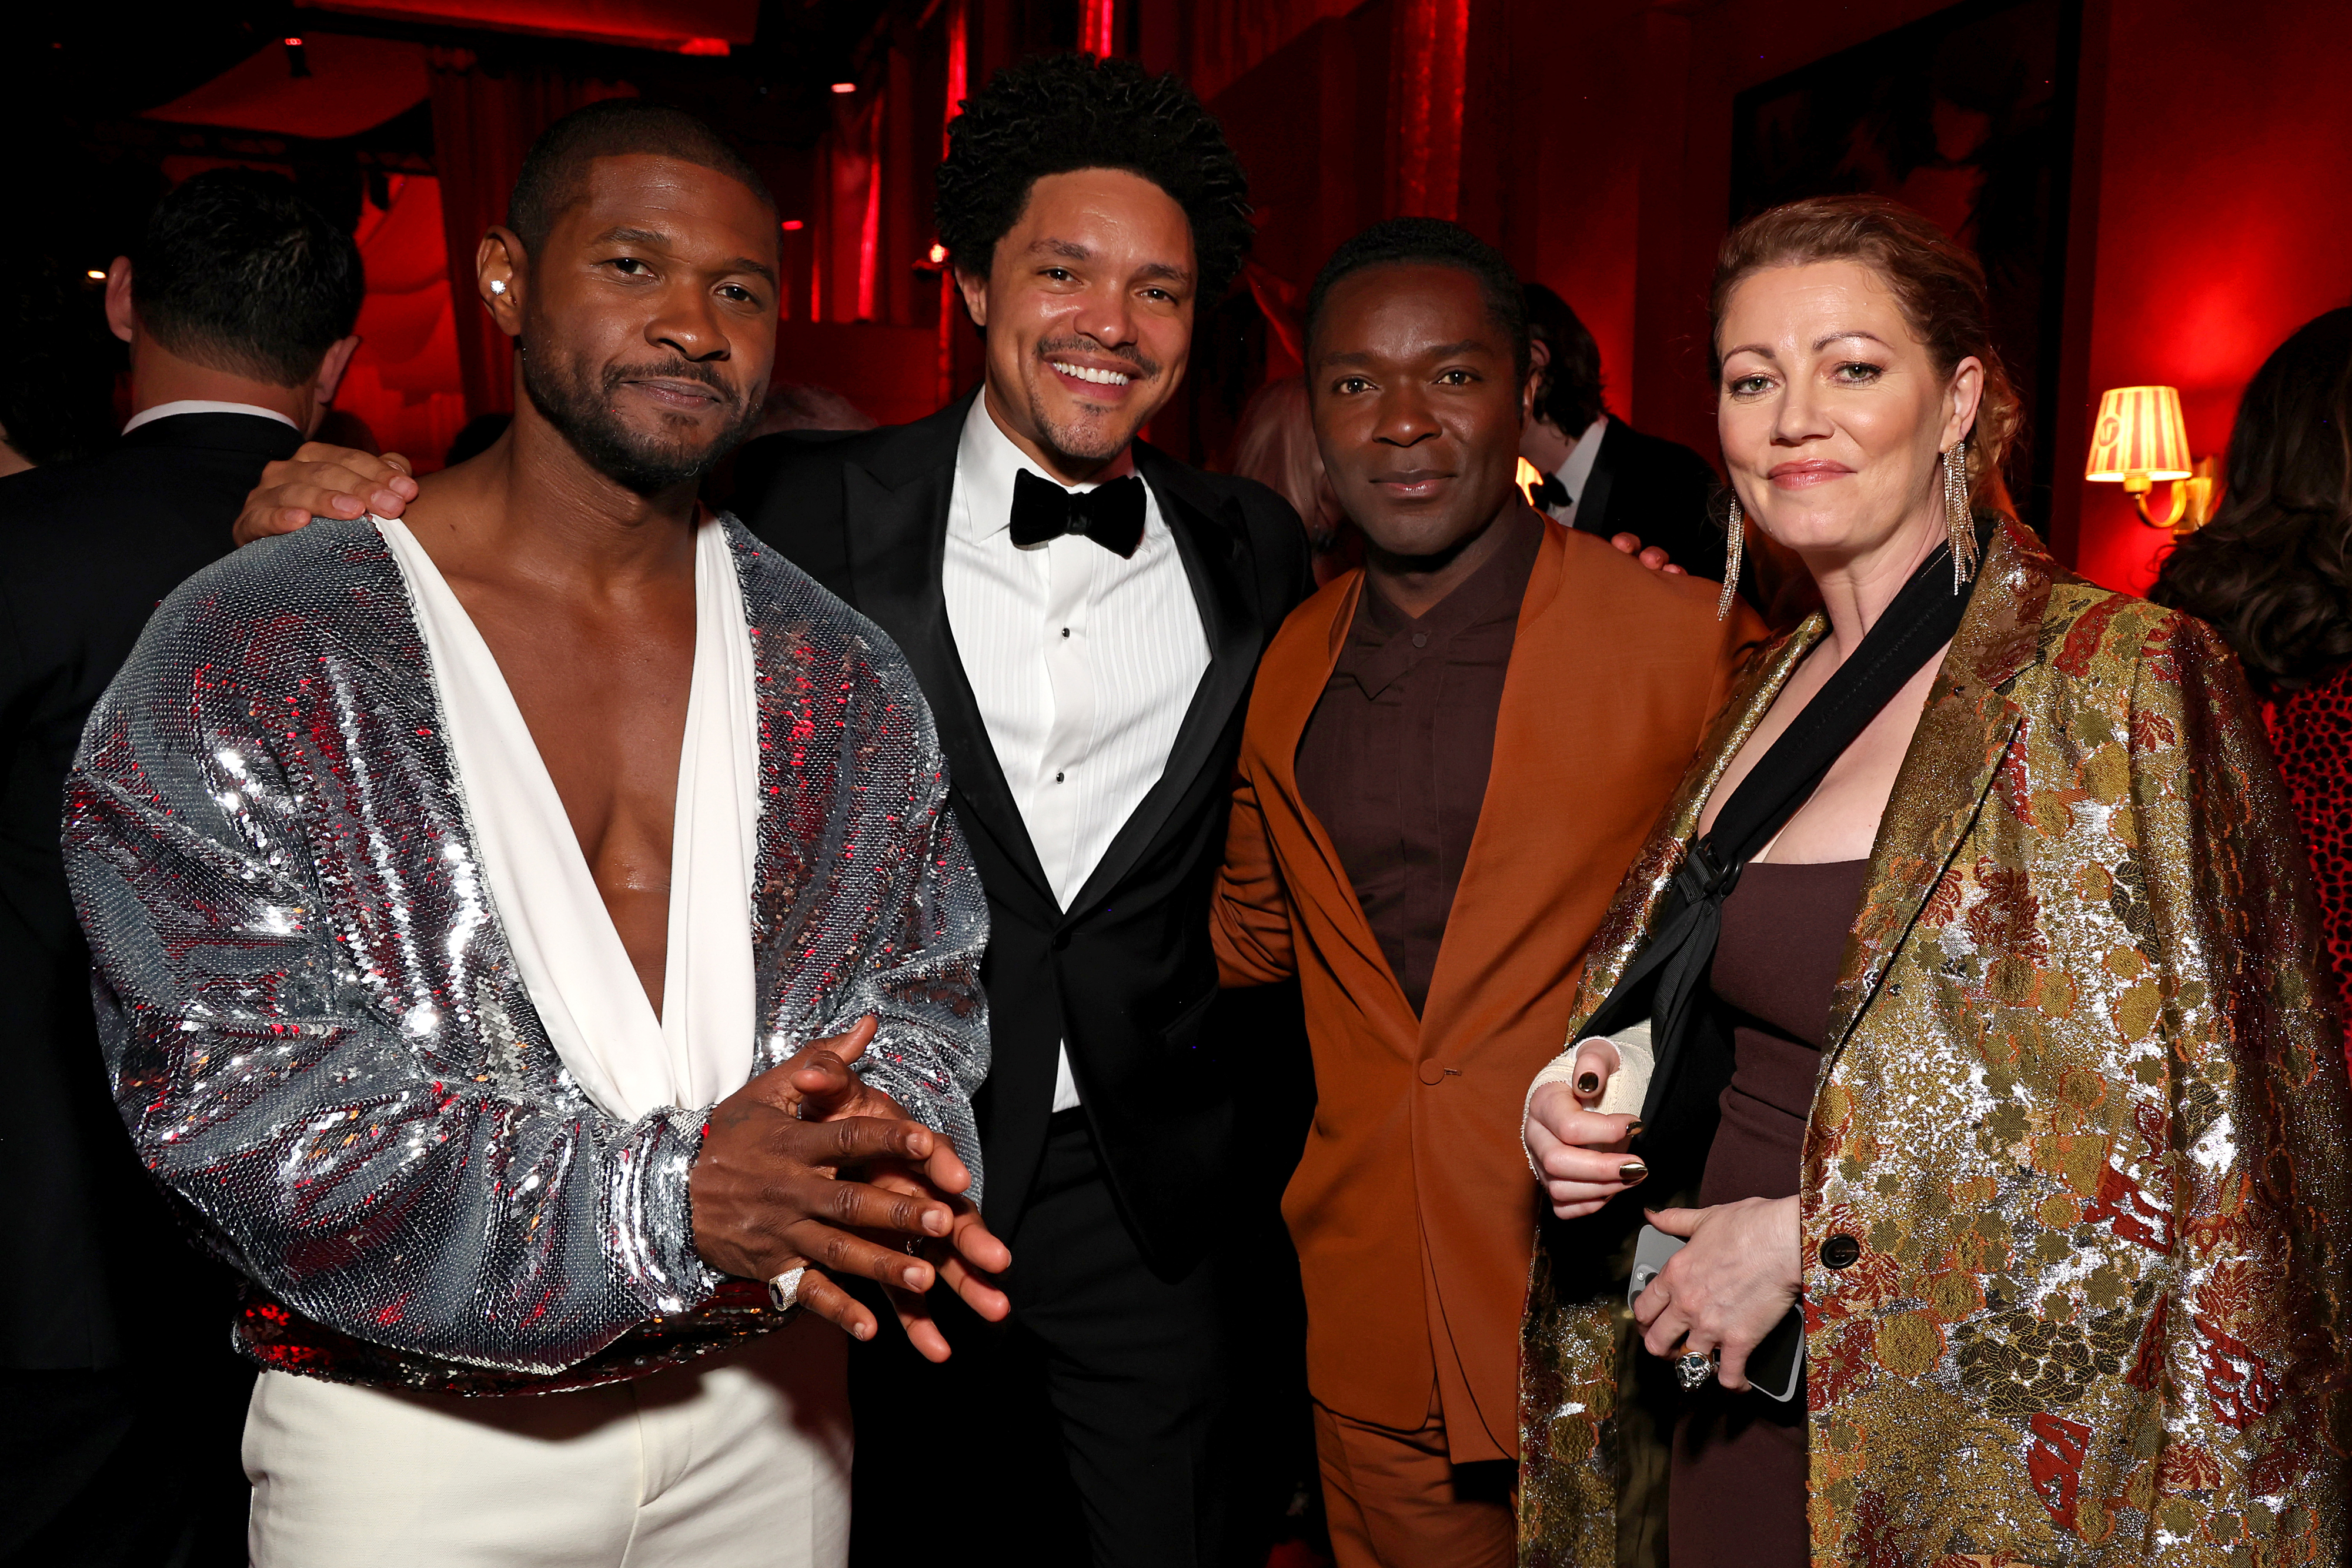 Usher, Trevor Noah, David Oyelowo, and another person at an event